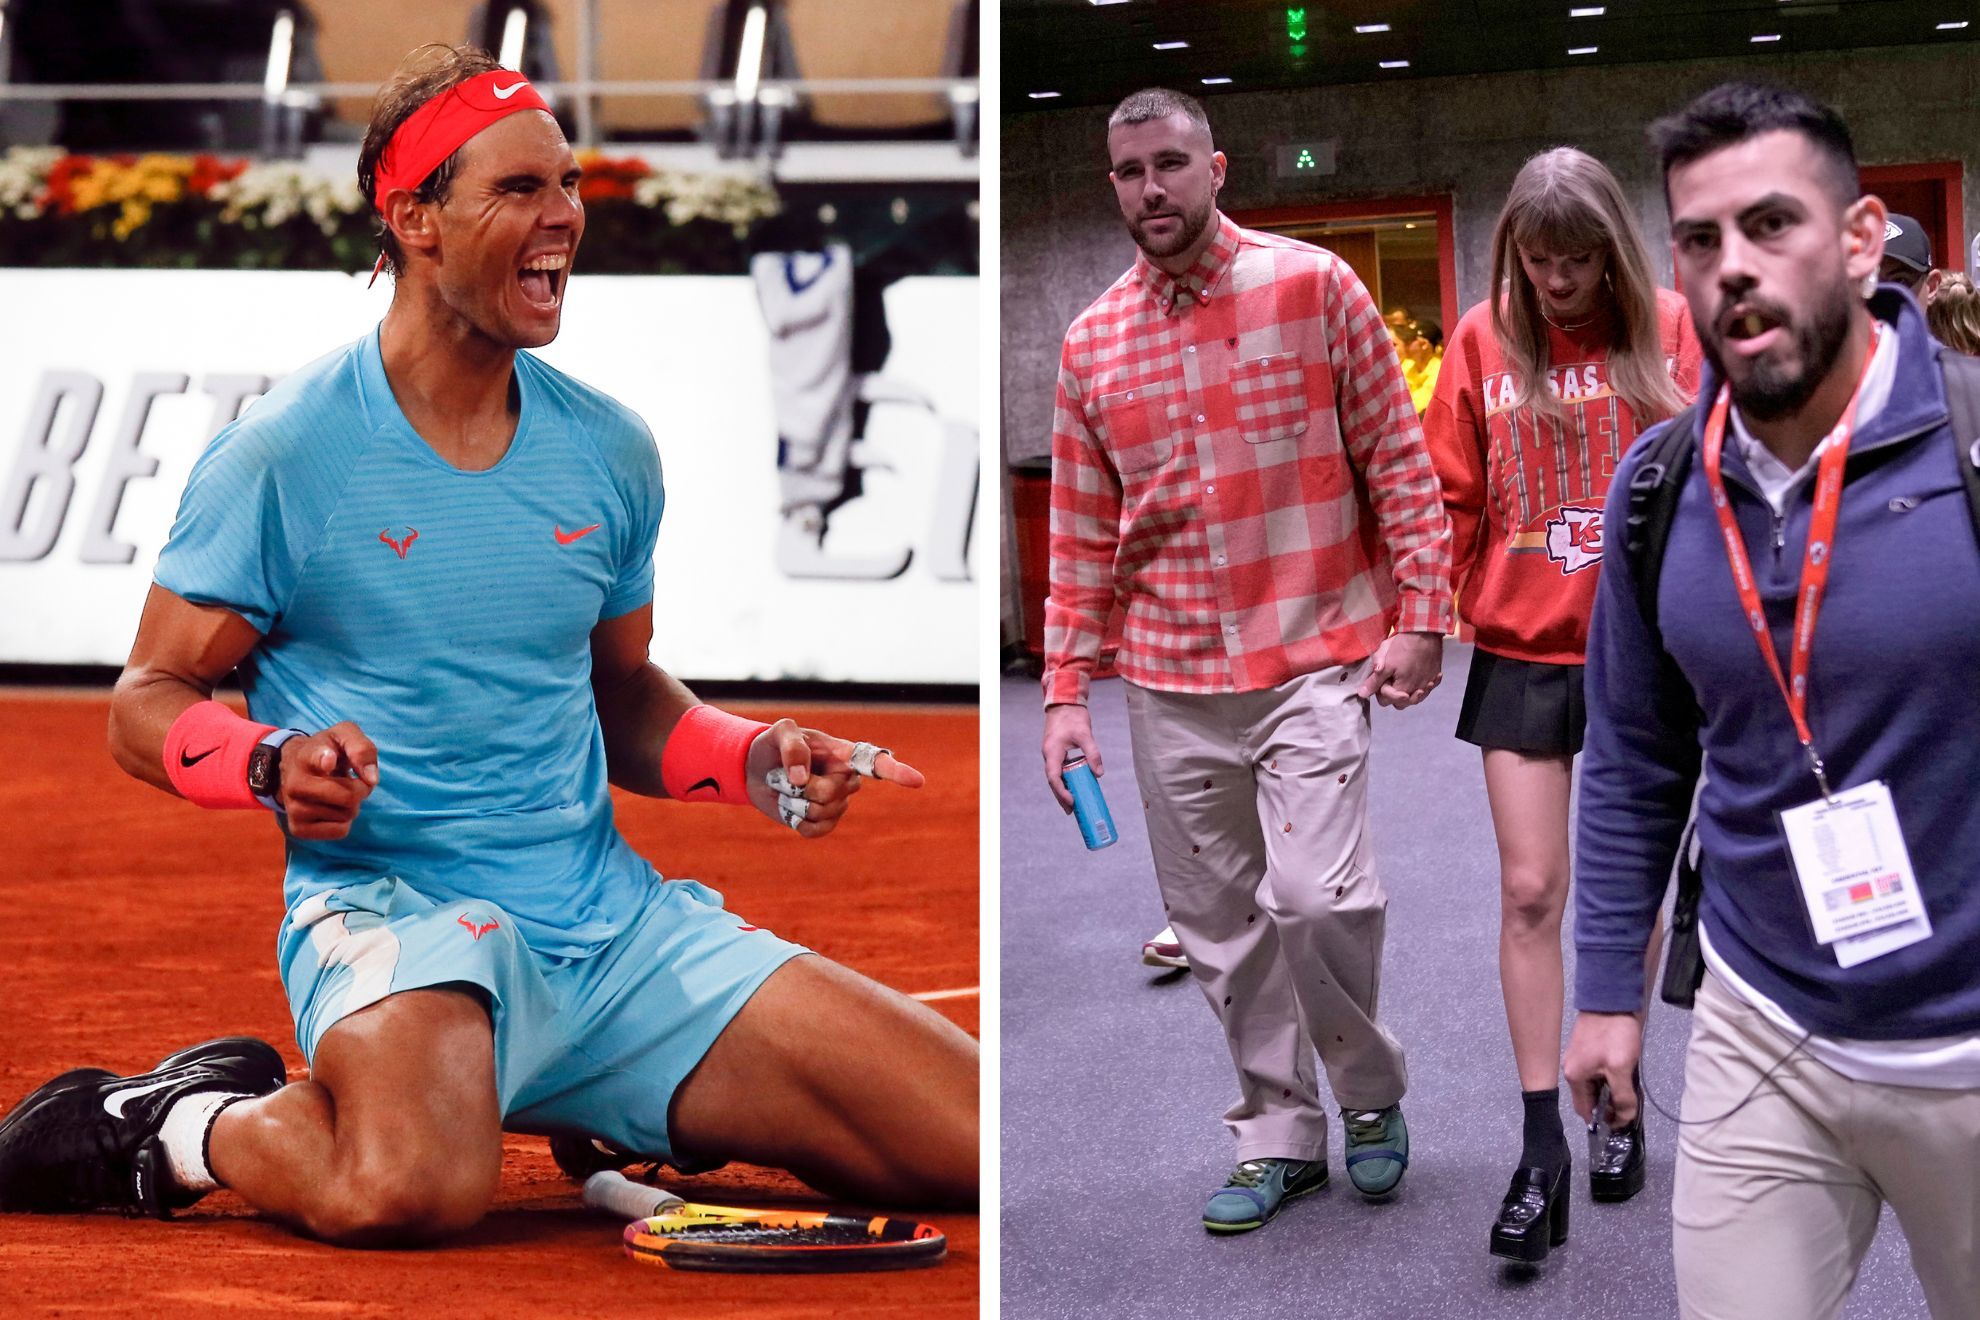 Rafael Nadal could cross paths with Taylor Swift next year thanks to Travis Kelce